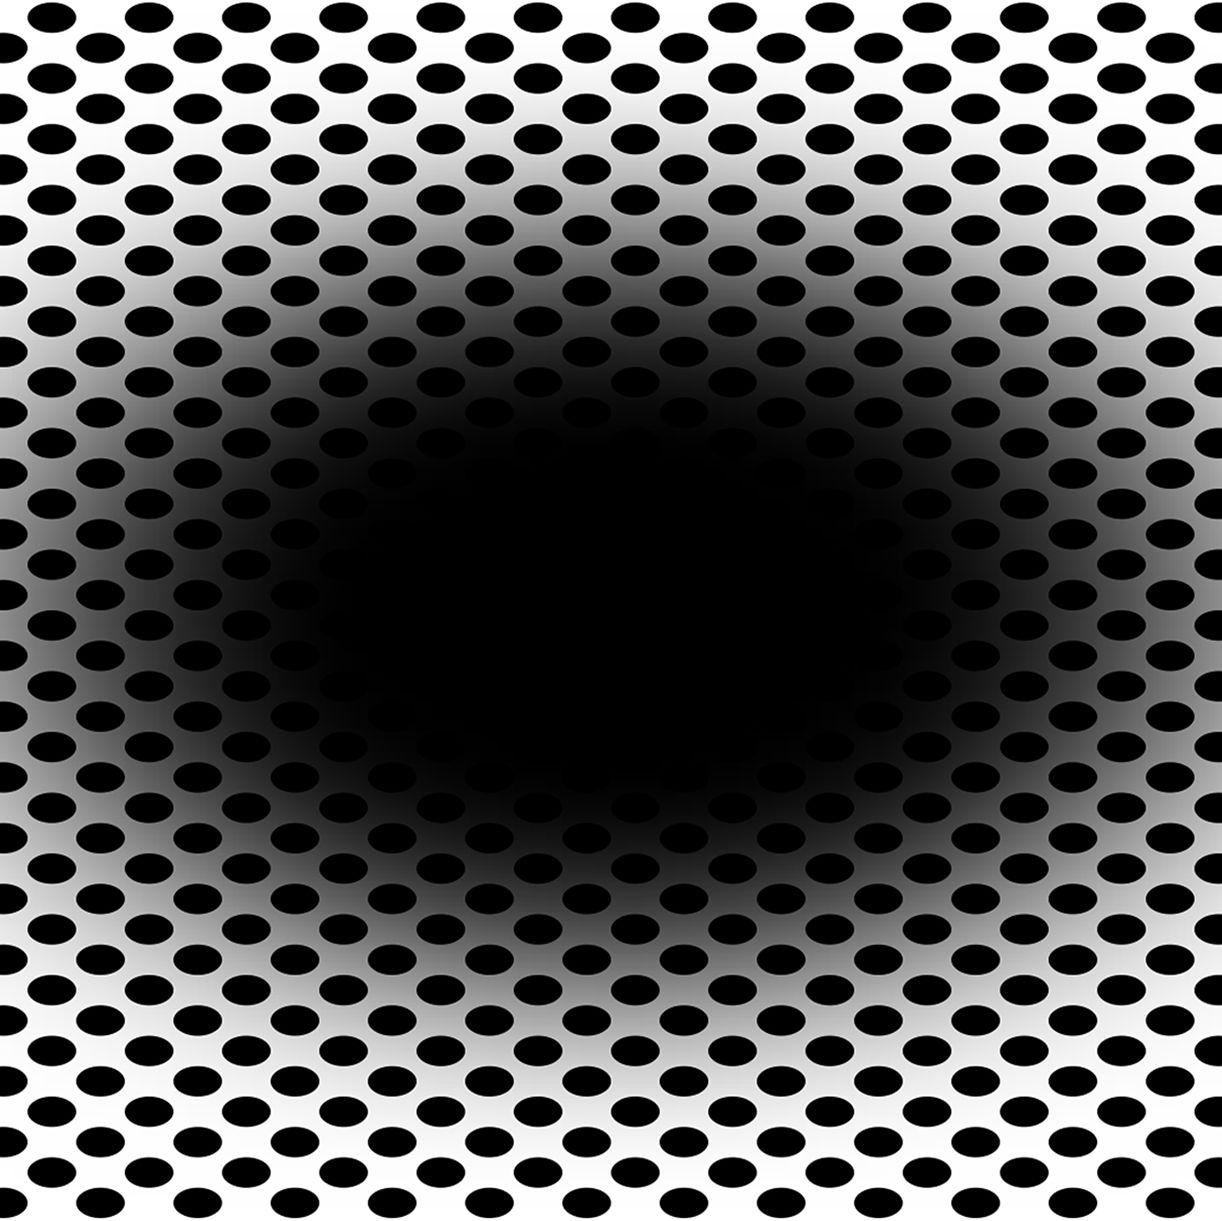 How This Illusion Makes You Think You're Entering a Tunnel